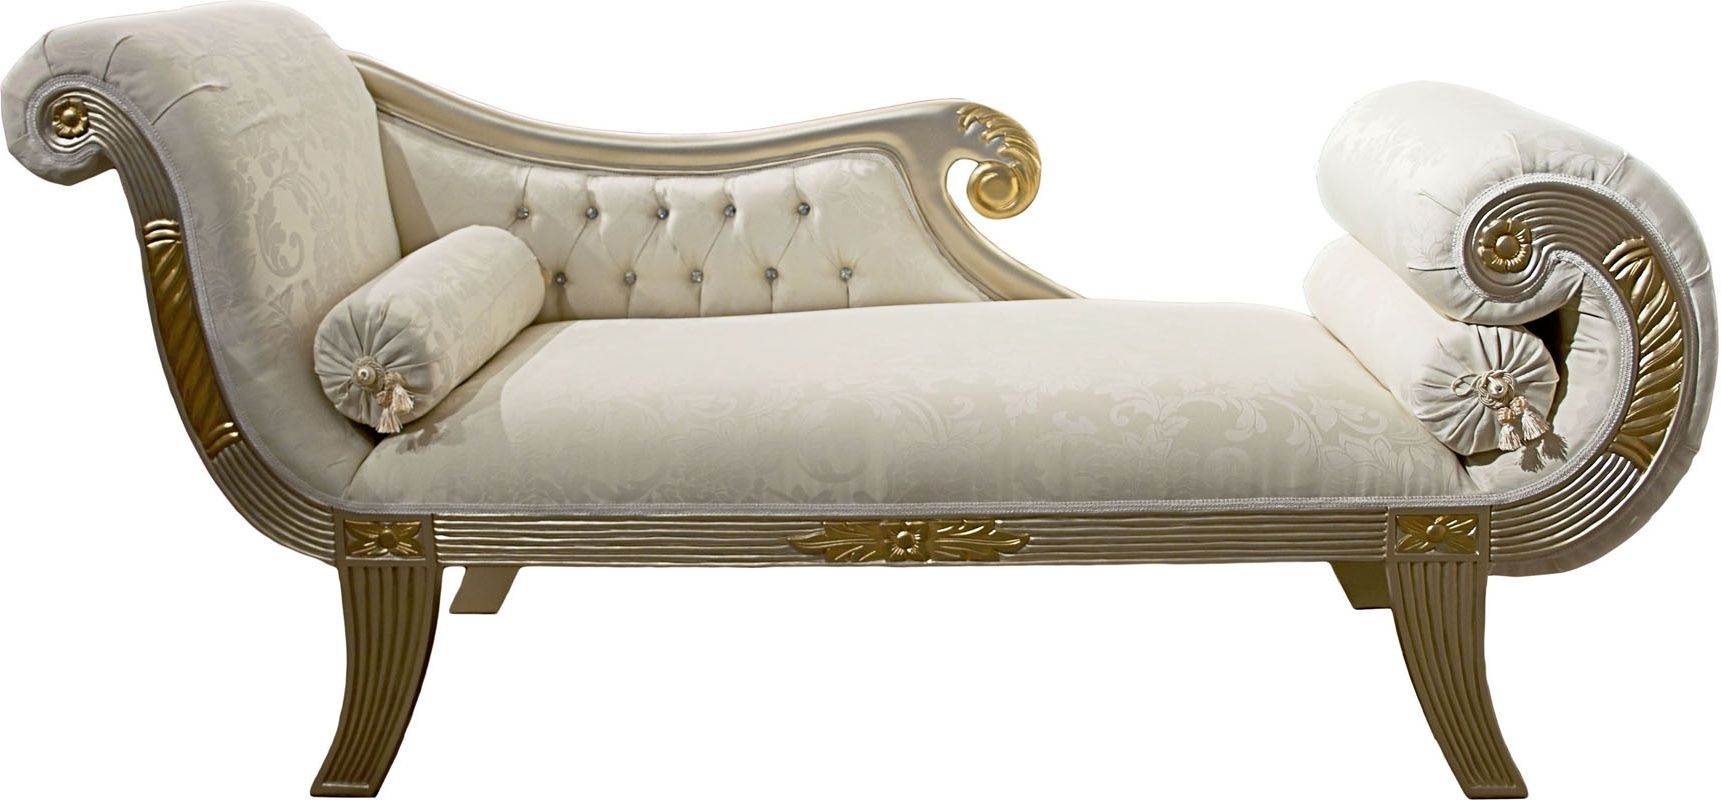 Victorian Chaise Lounges With Regard To Most Popular White Leather Vintage Chaise Lounge Chair In Victorian Style Plus (View 12 of 15)